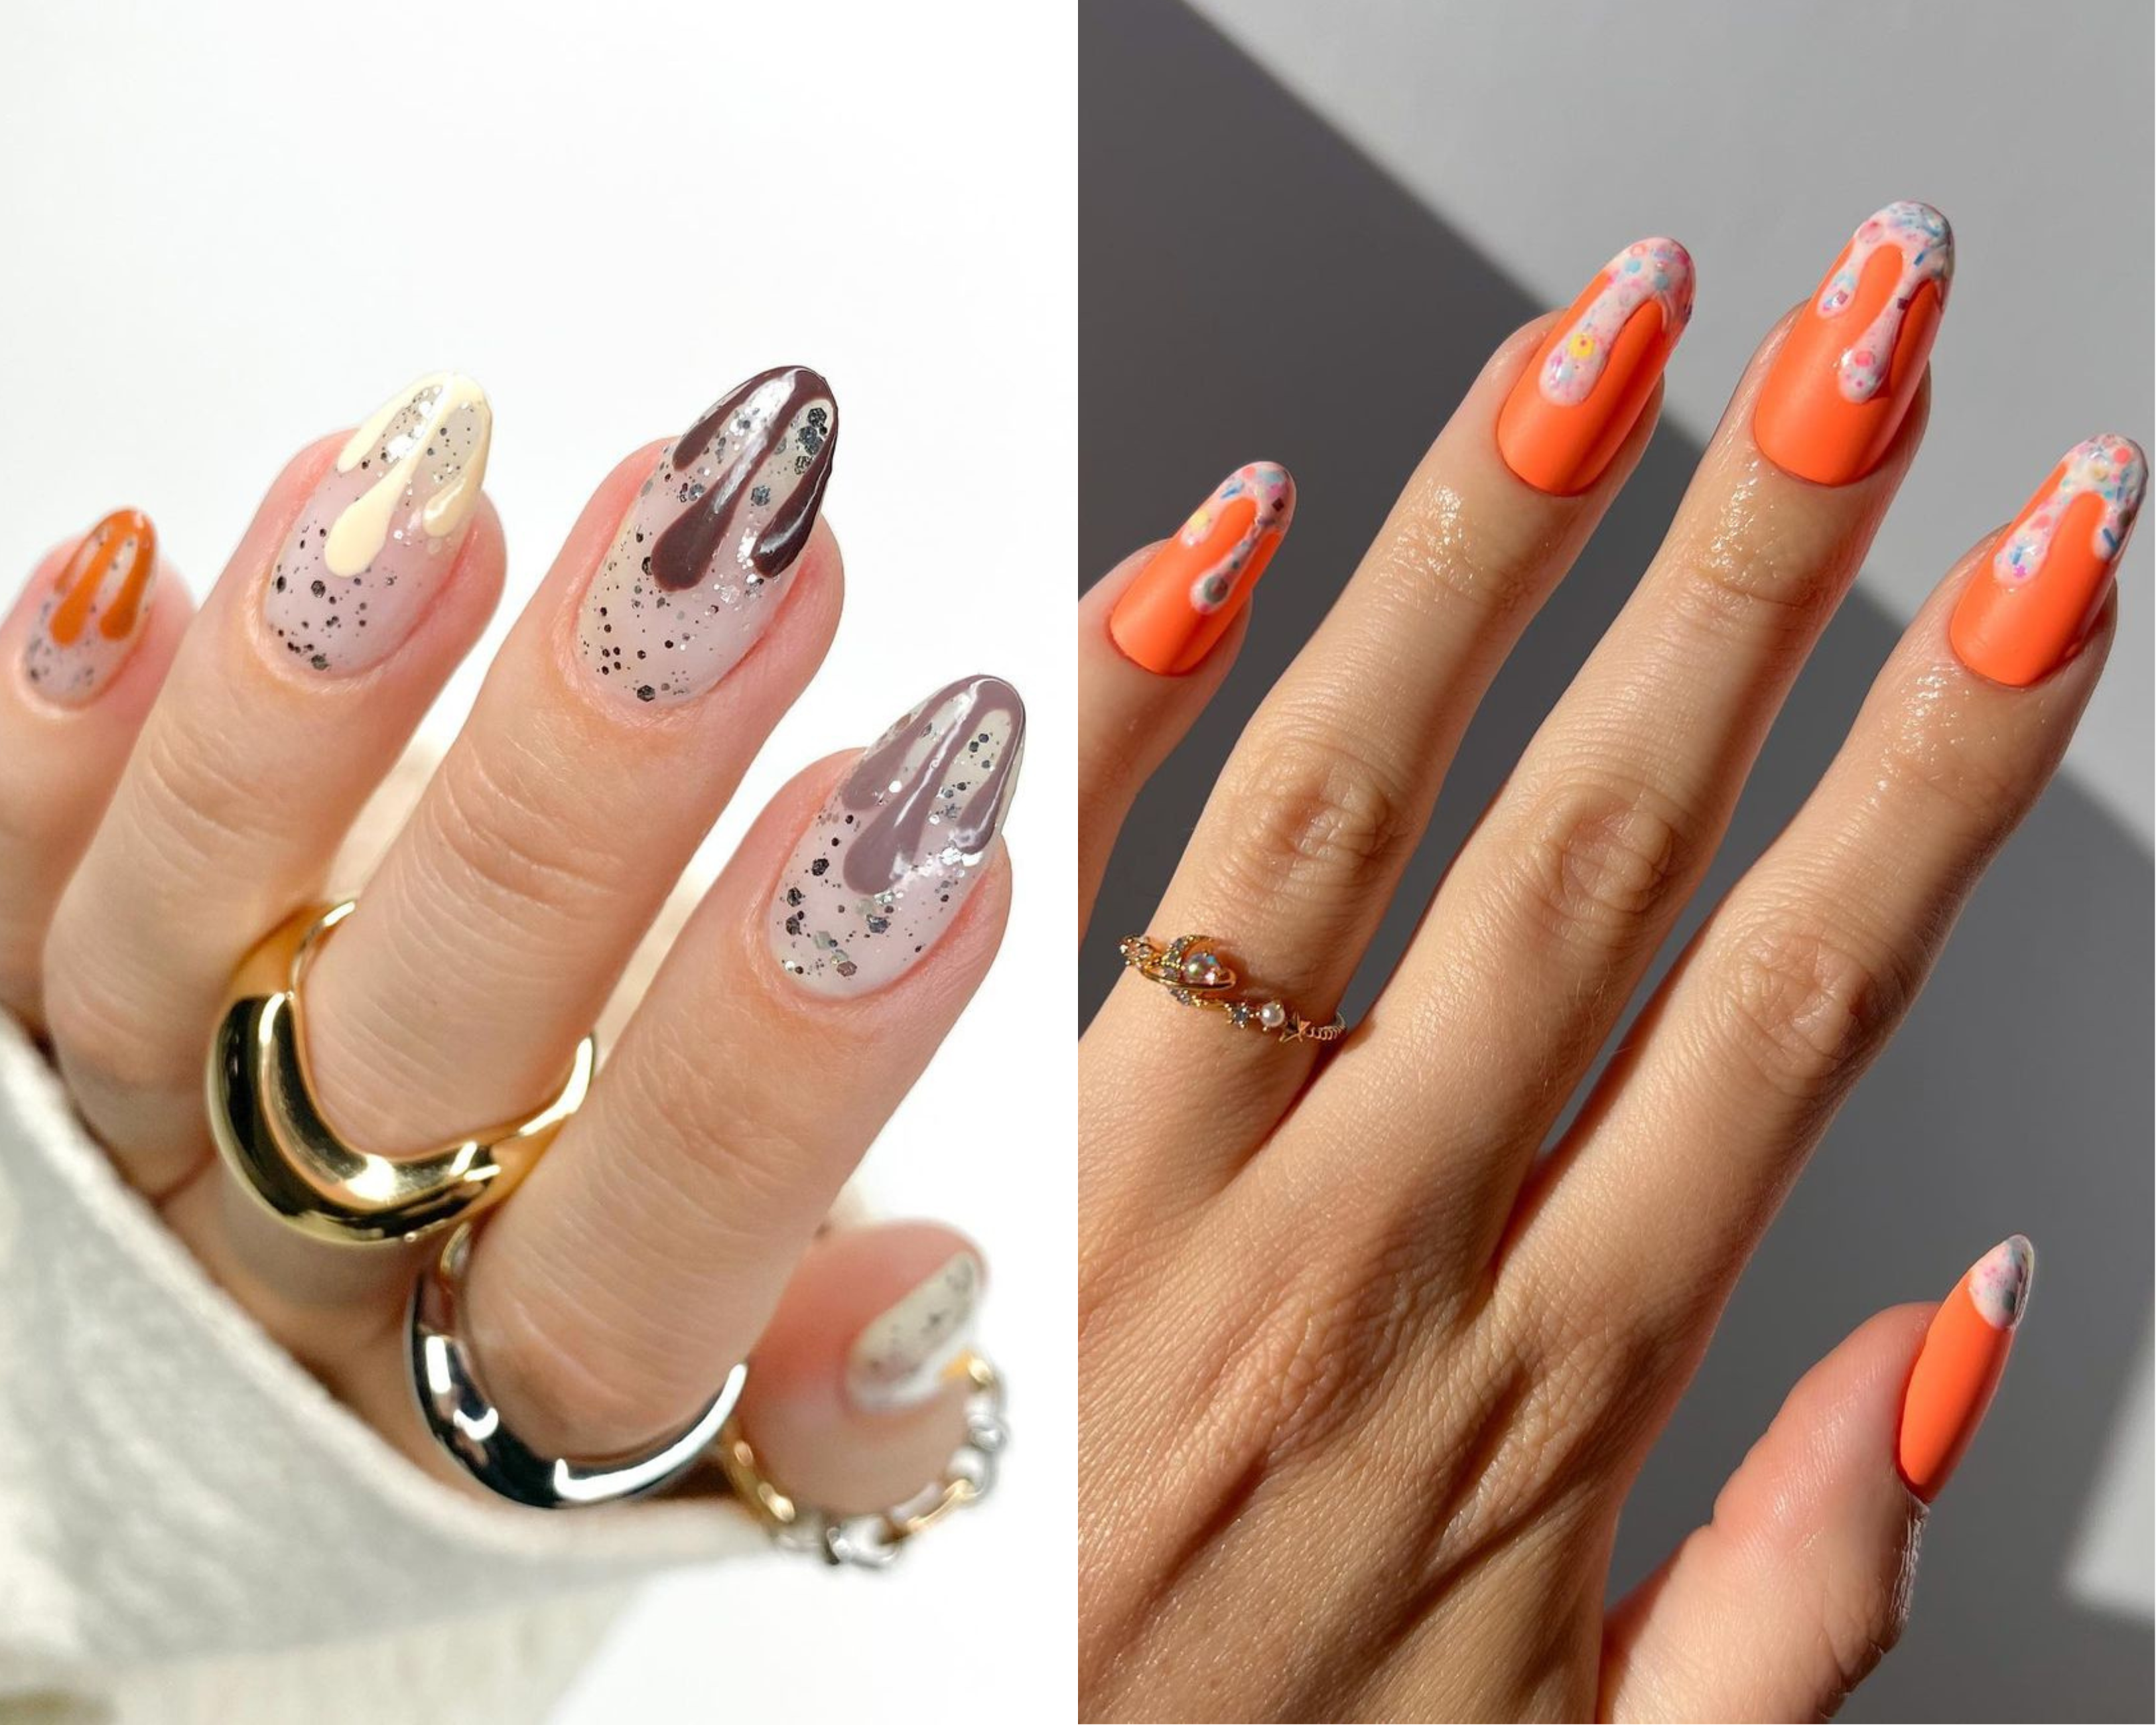 Ice Cream Nails Are Trending for Summer, and They’re So Easy to DIY